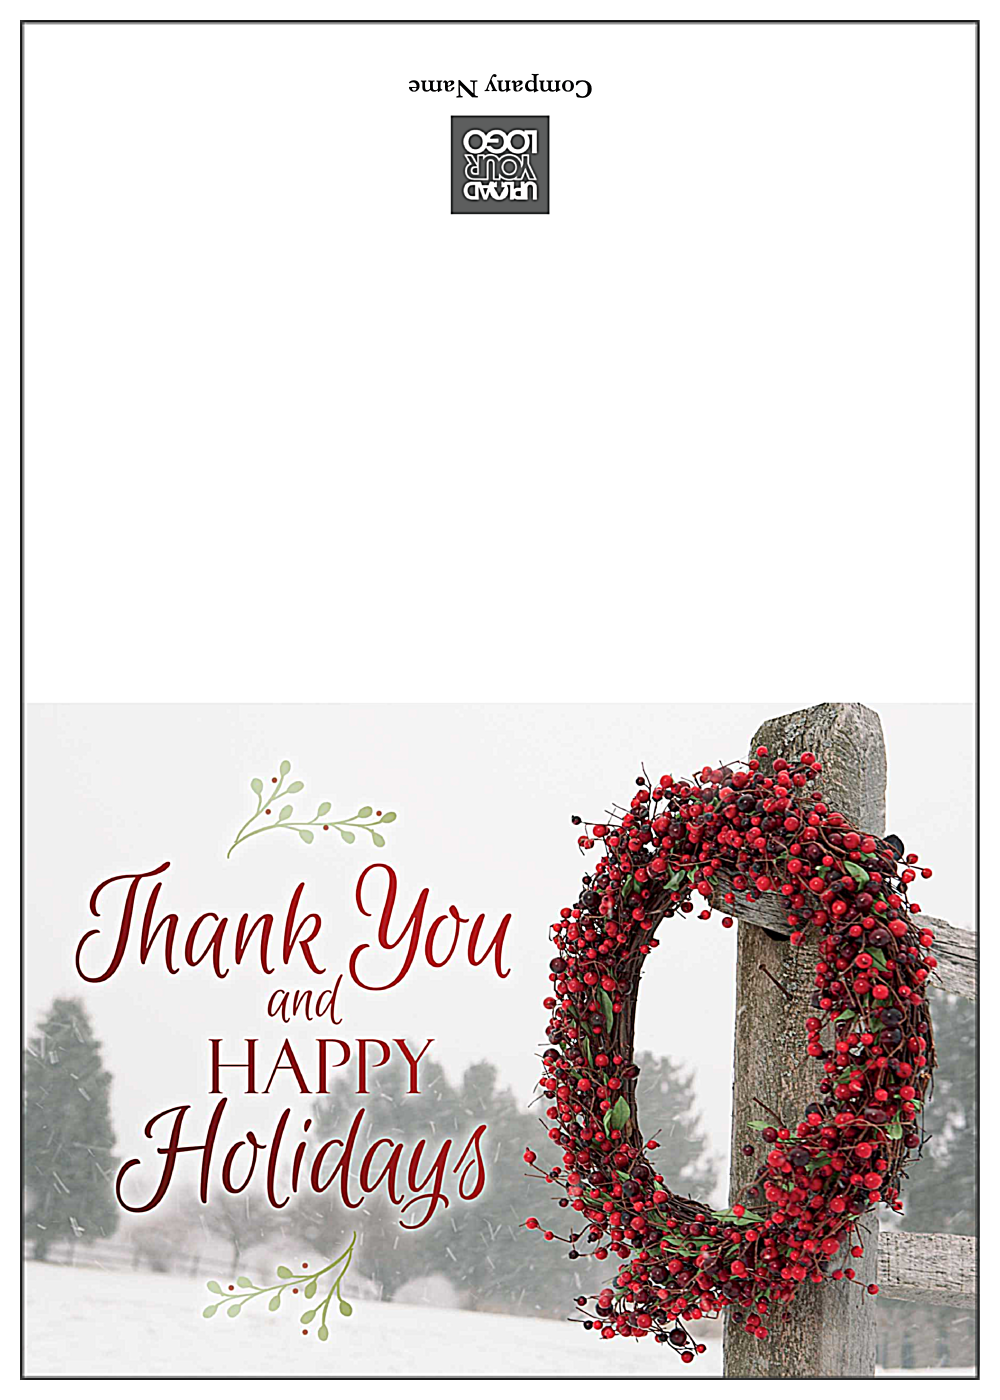 Happy Holidays Wreath front - Greeting Cards Maker